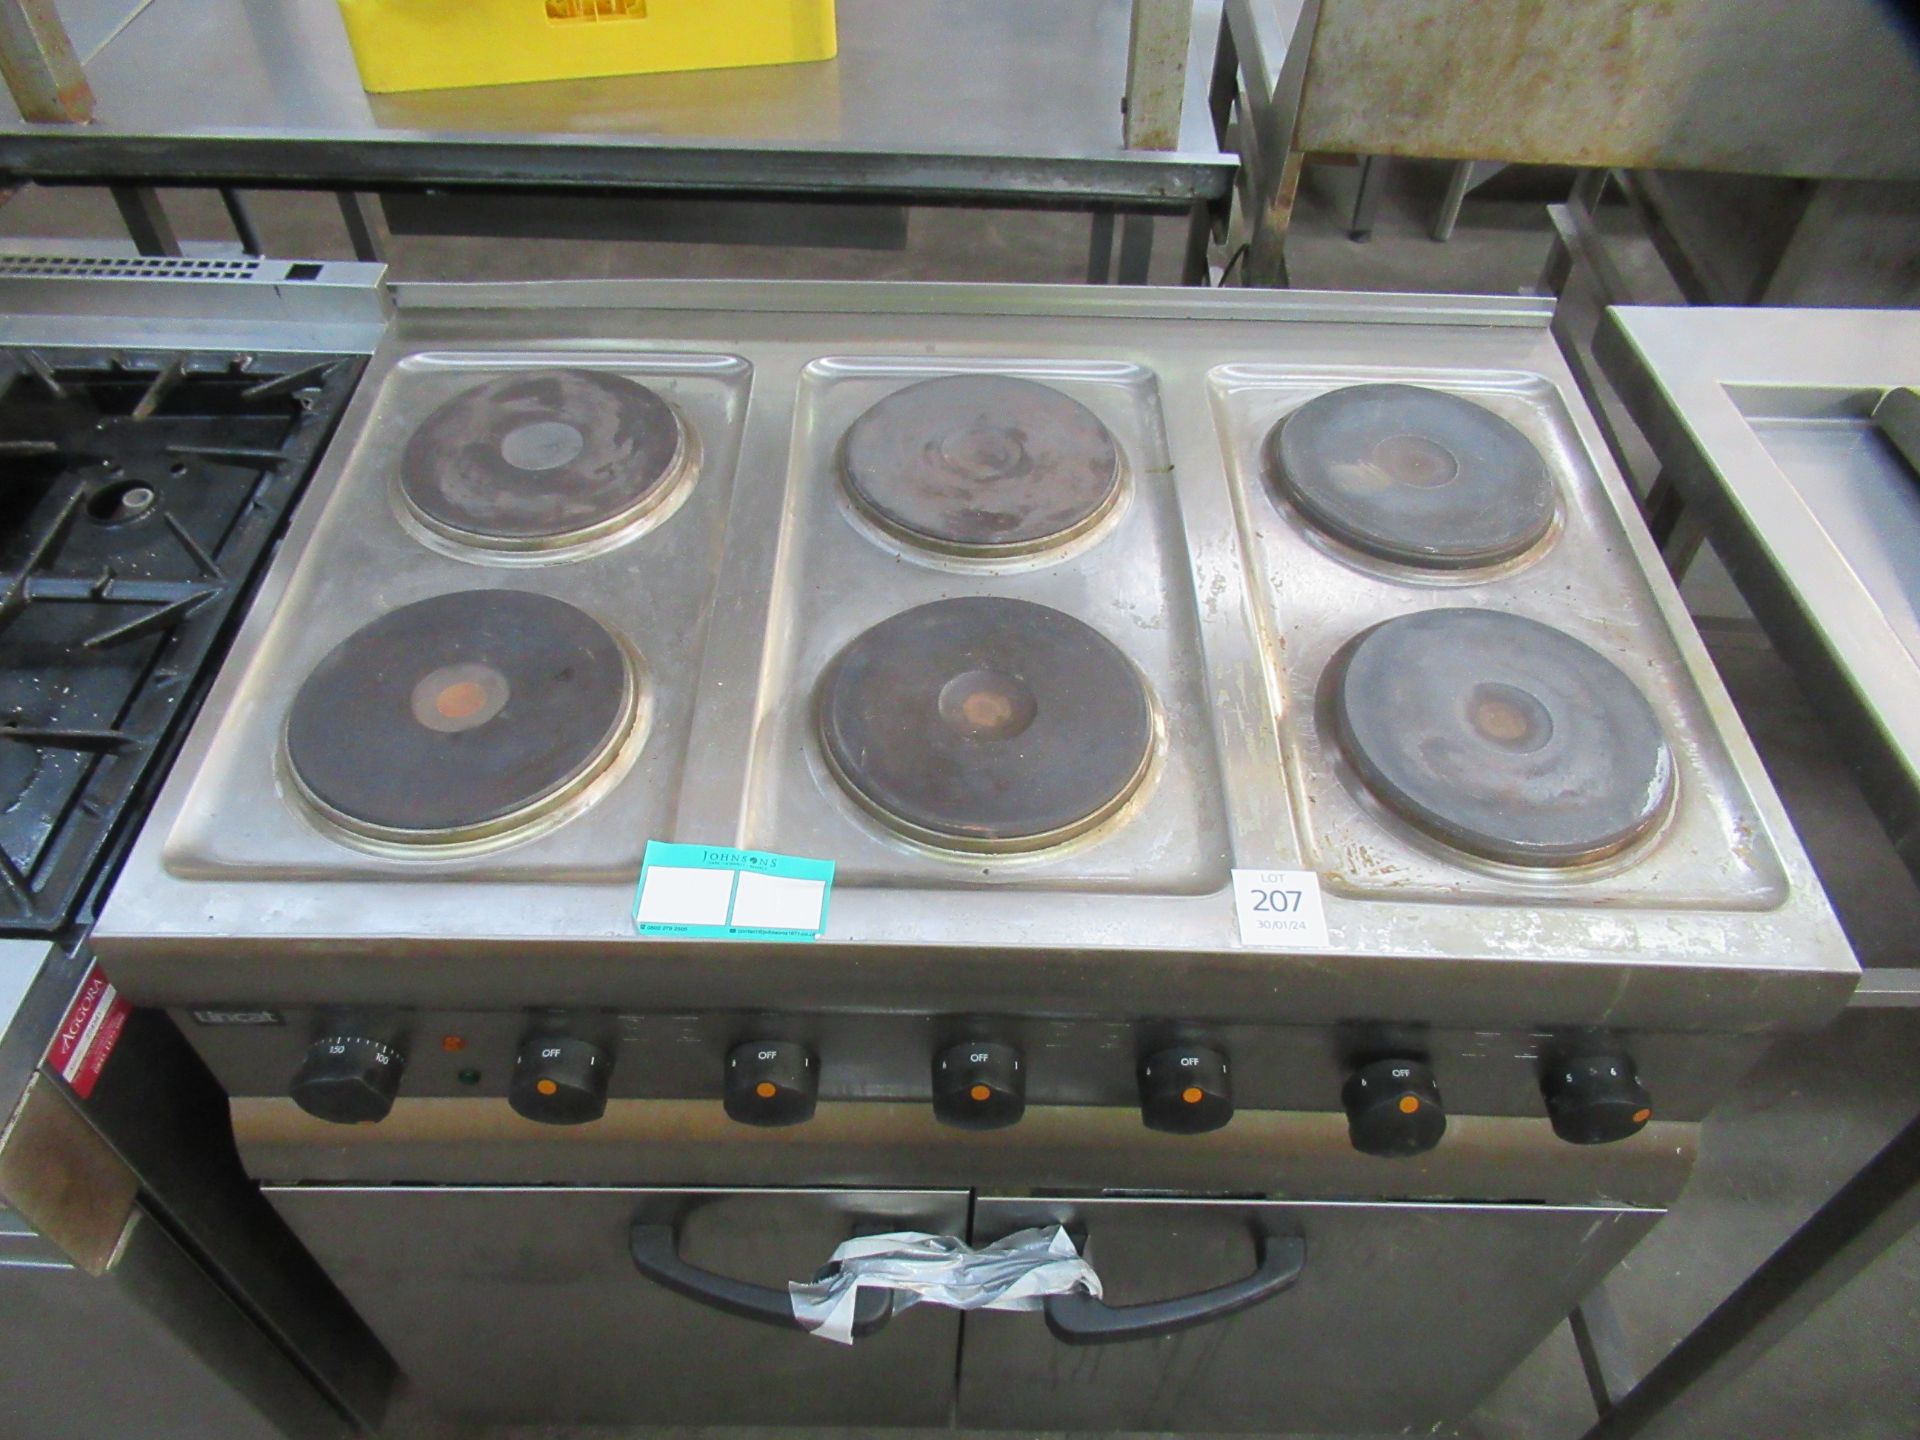 Lincat Commercial Catering Six Ring Electric Cooker - 3ph. - Image 2 of 2